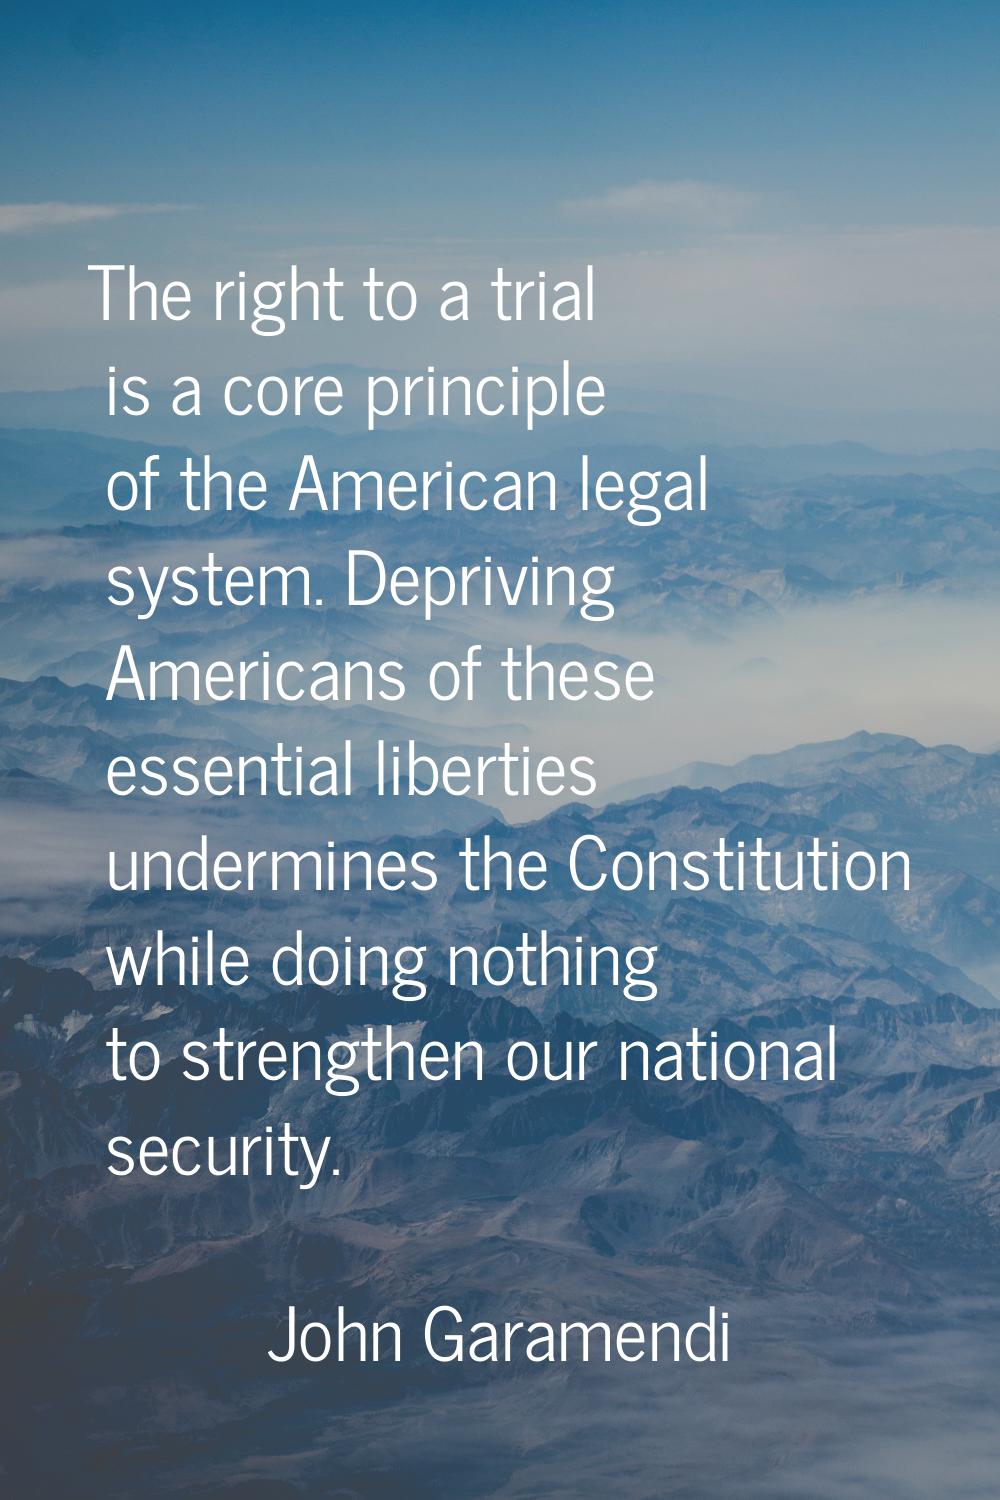 The right to a trial is a core principle of the American legal system. Depriving Americans of these